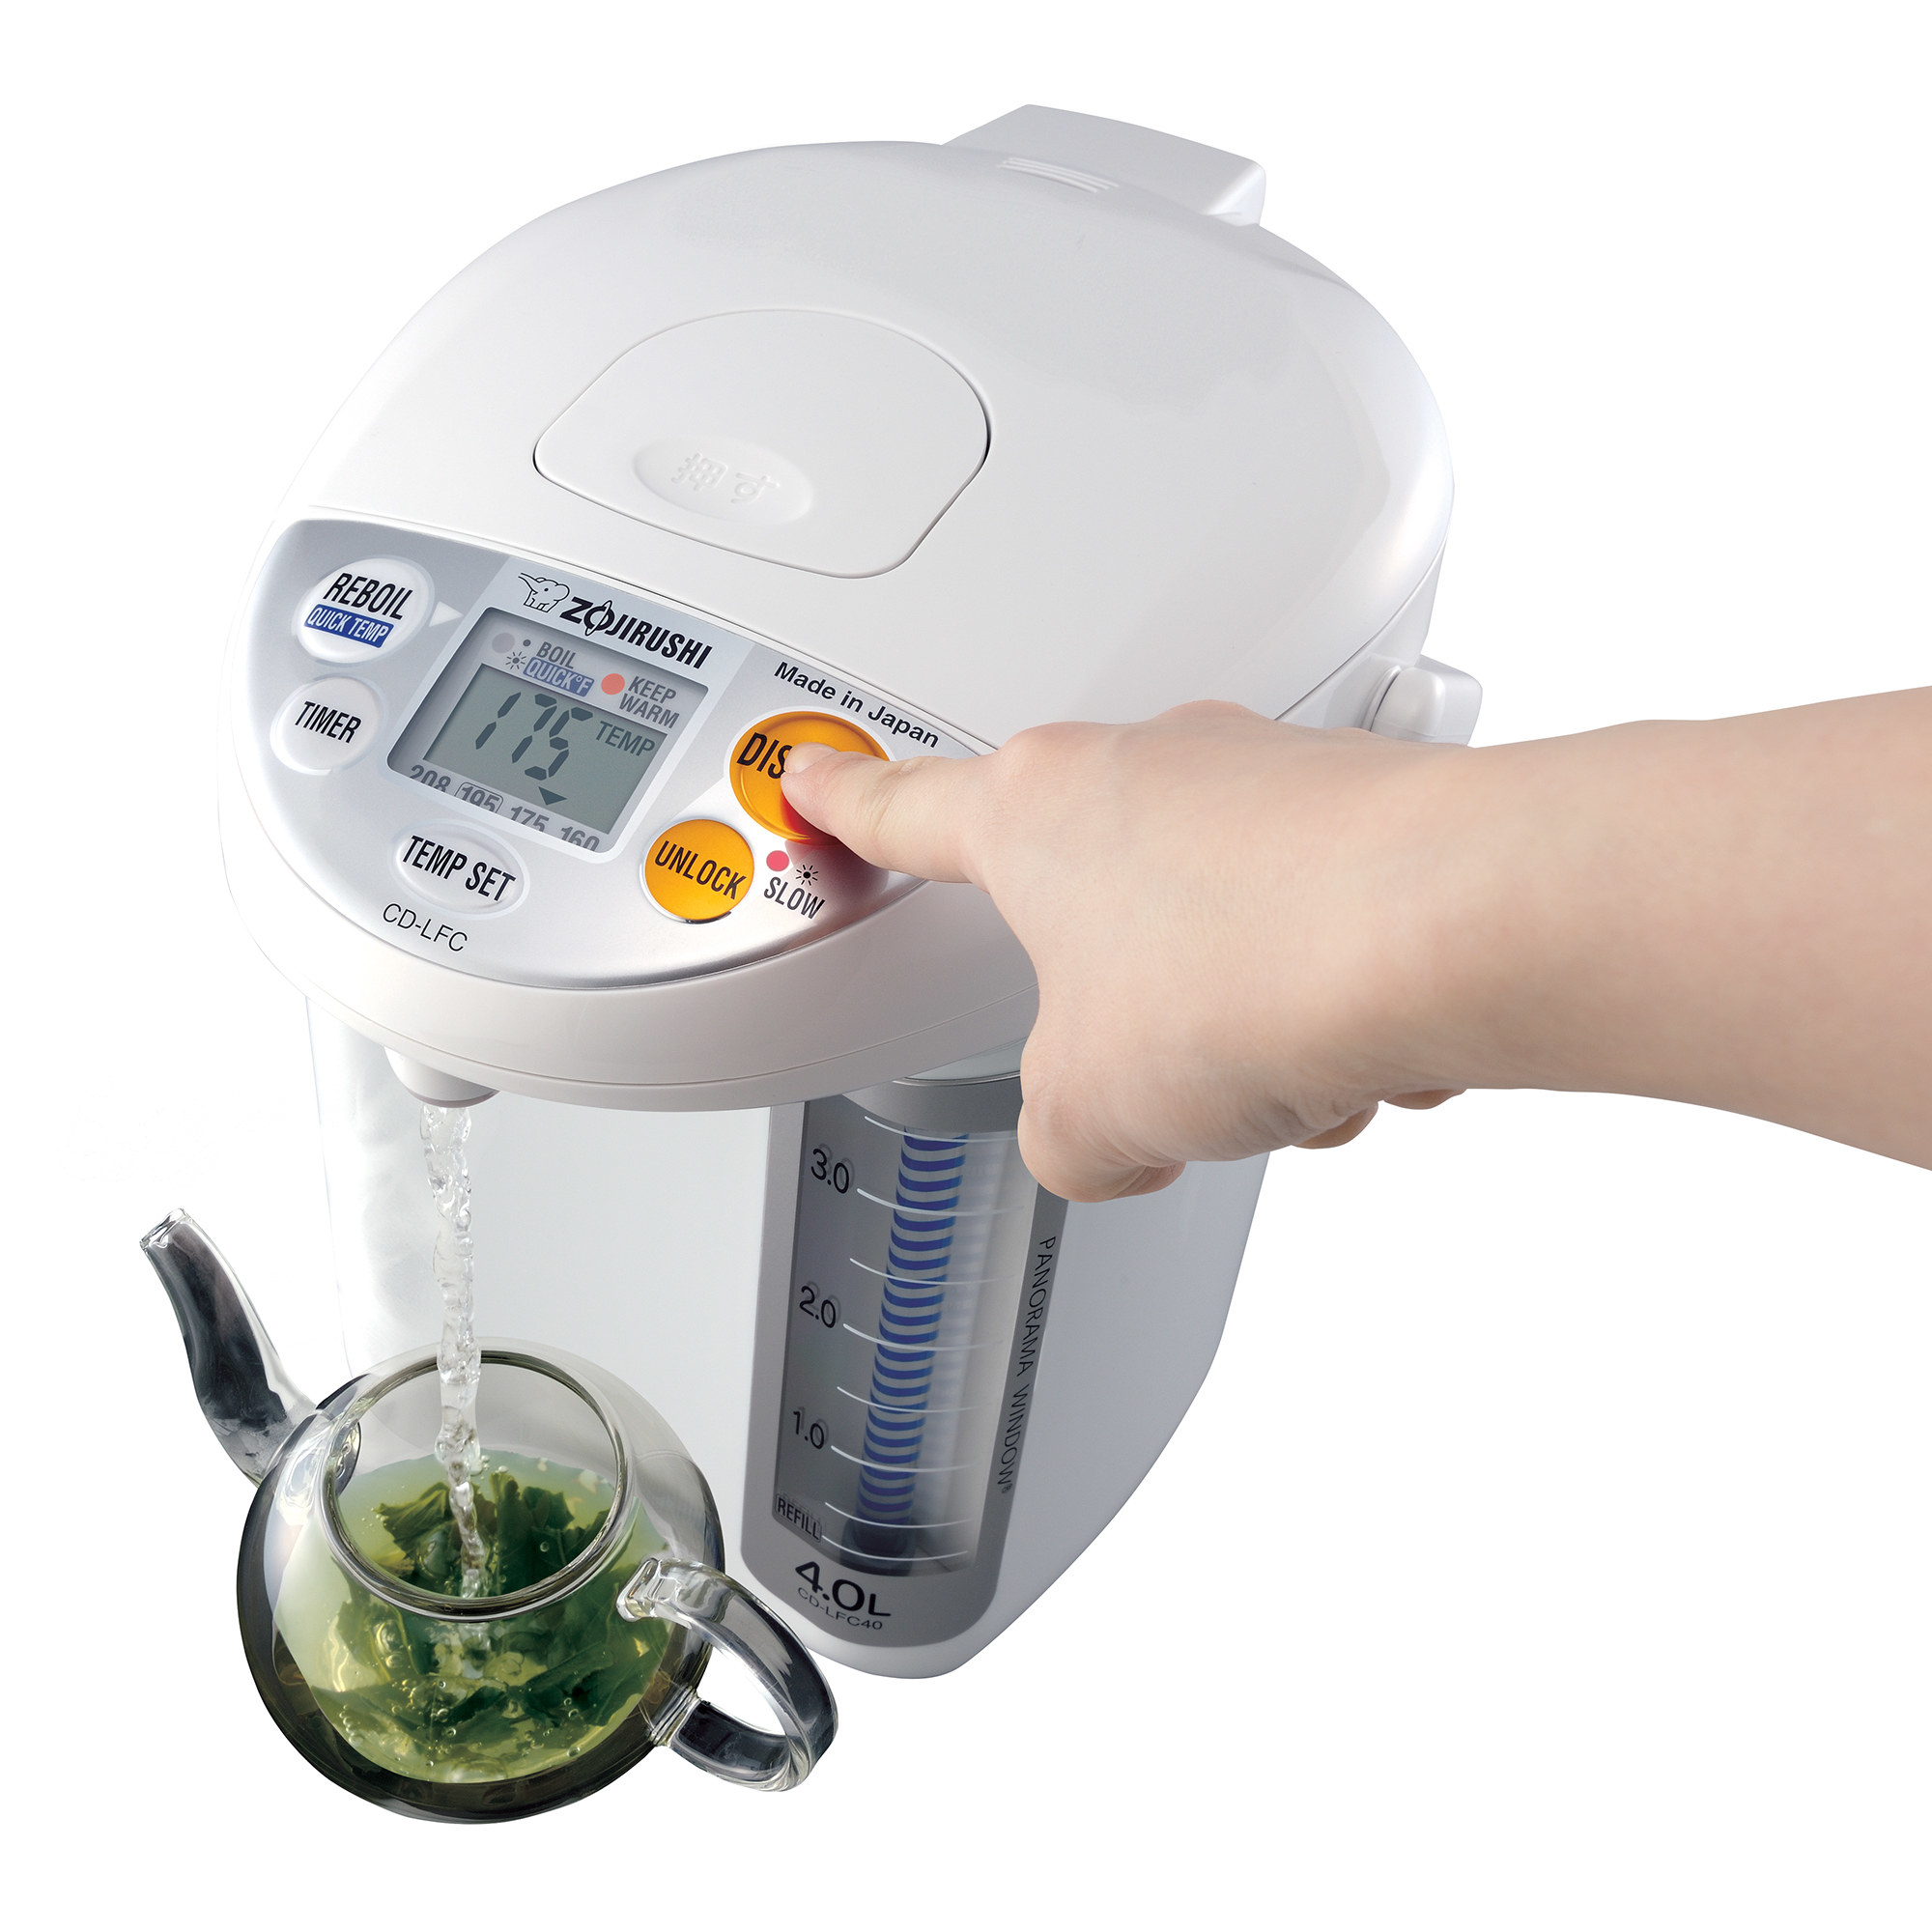 A person using the water boiler to make tea